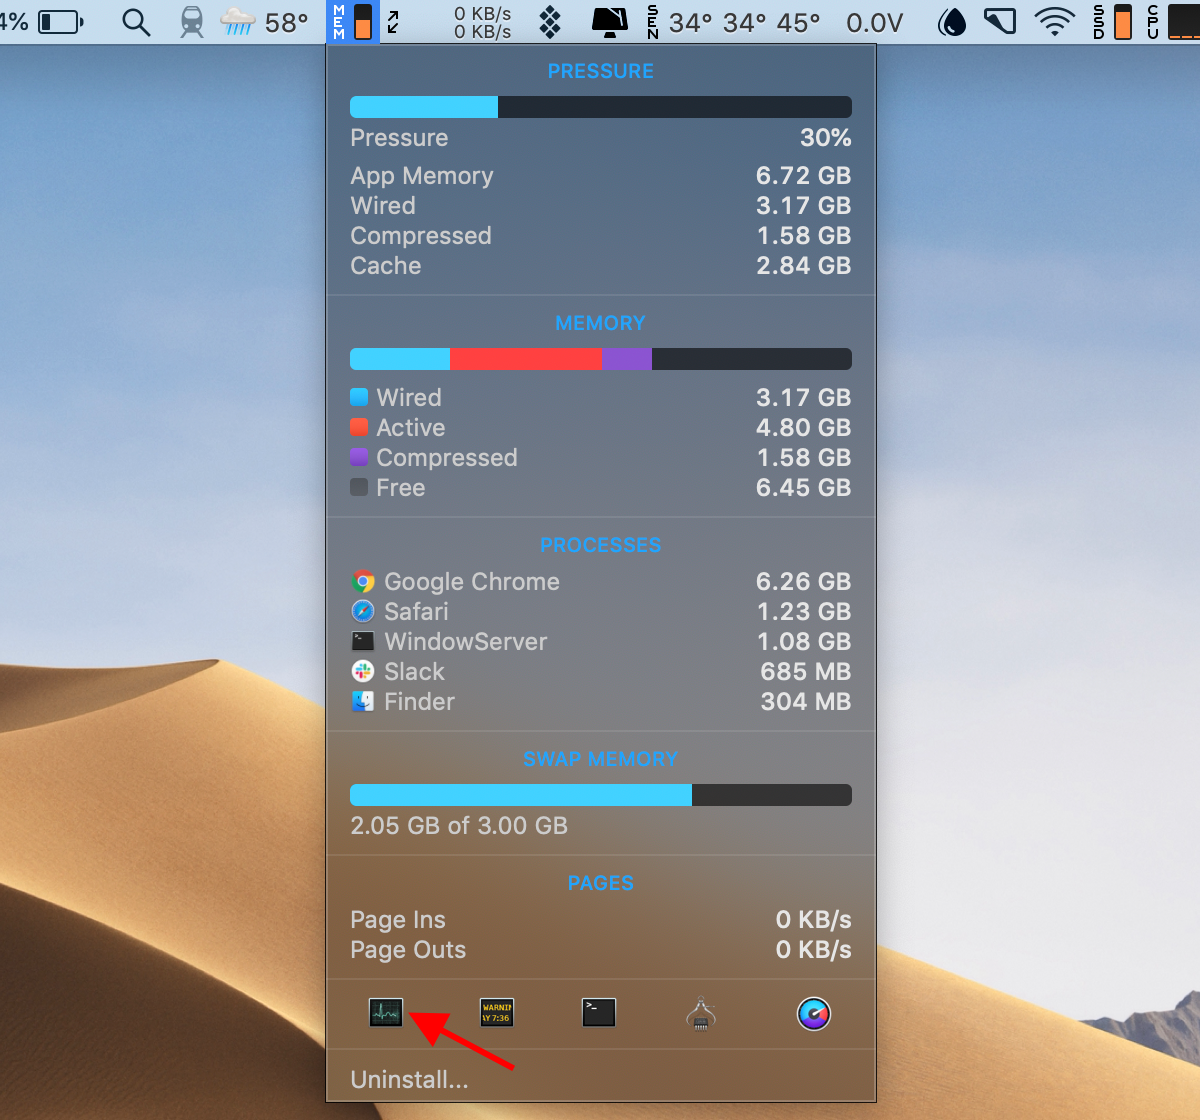 launch Activity Monitor from the iStat Menus